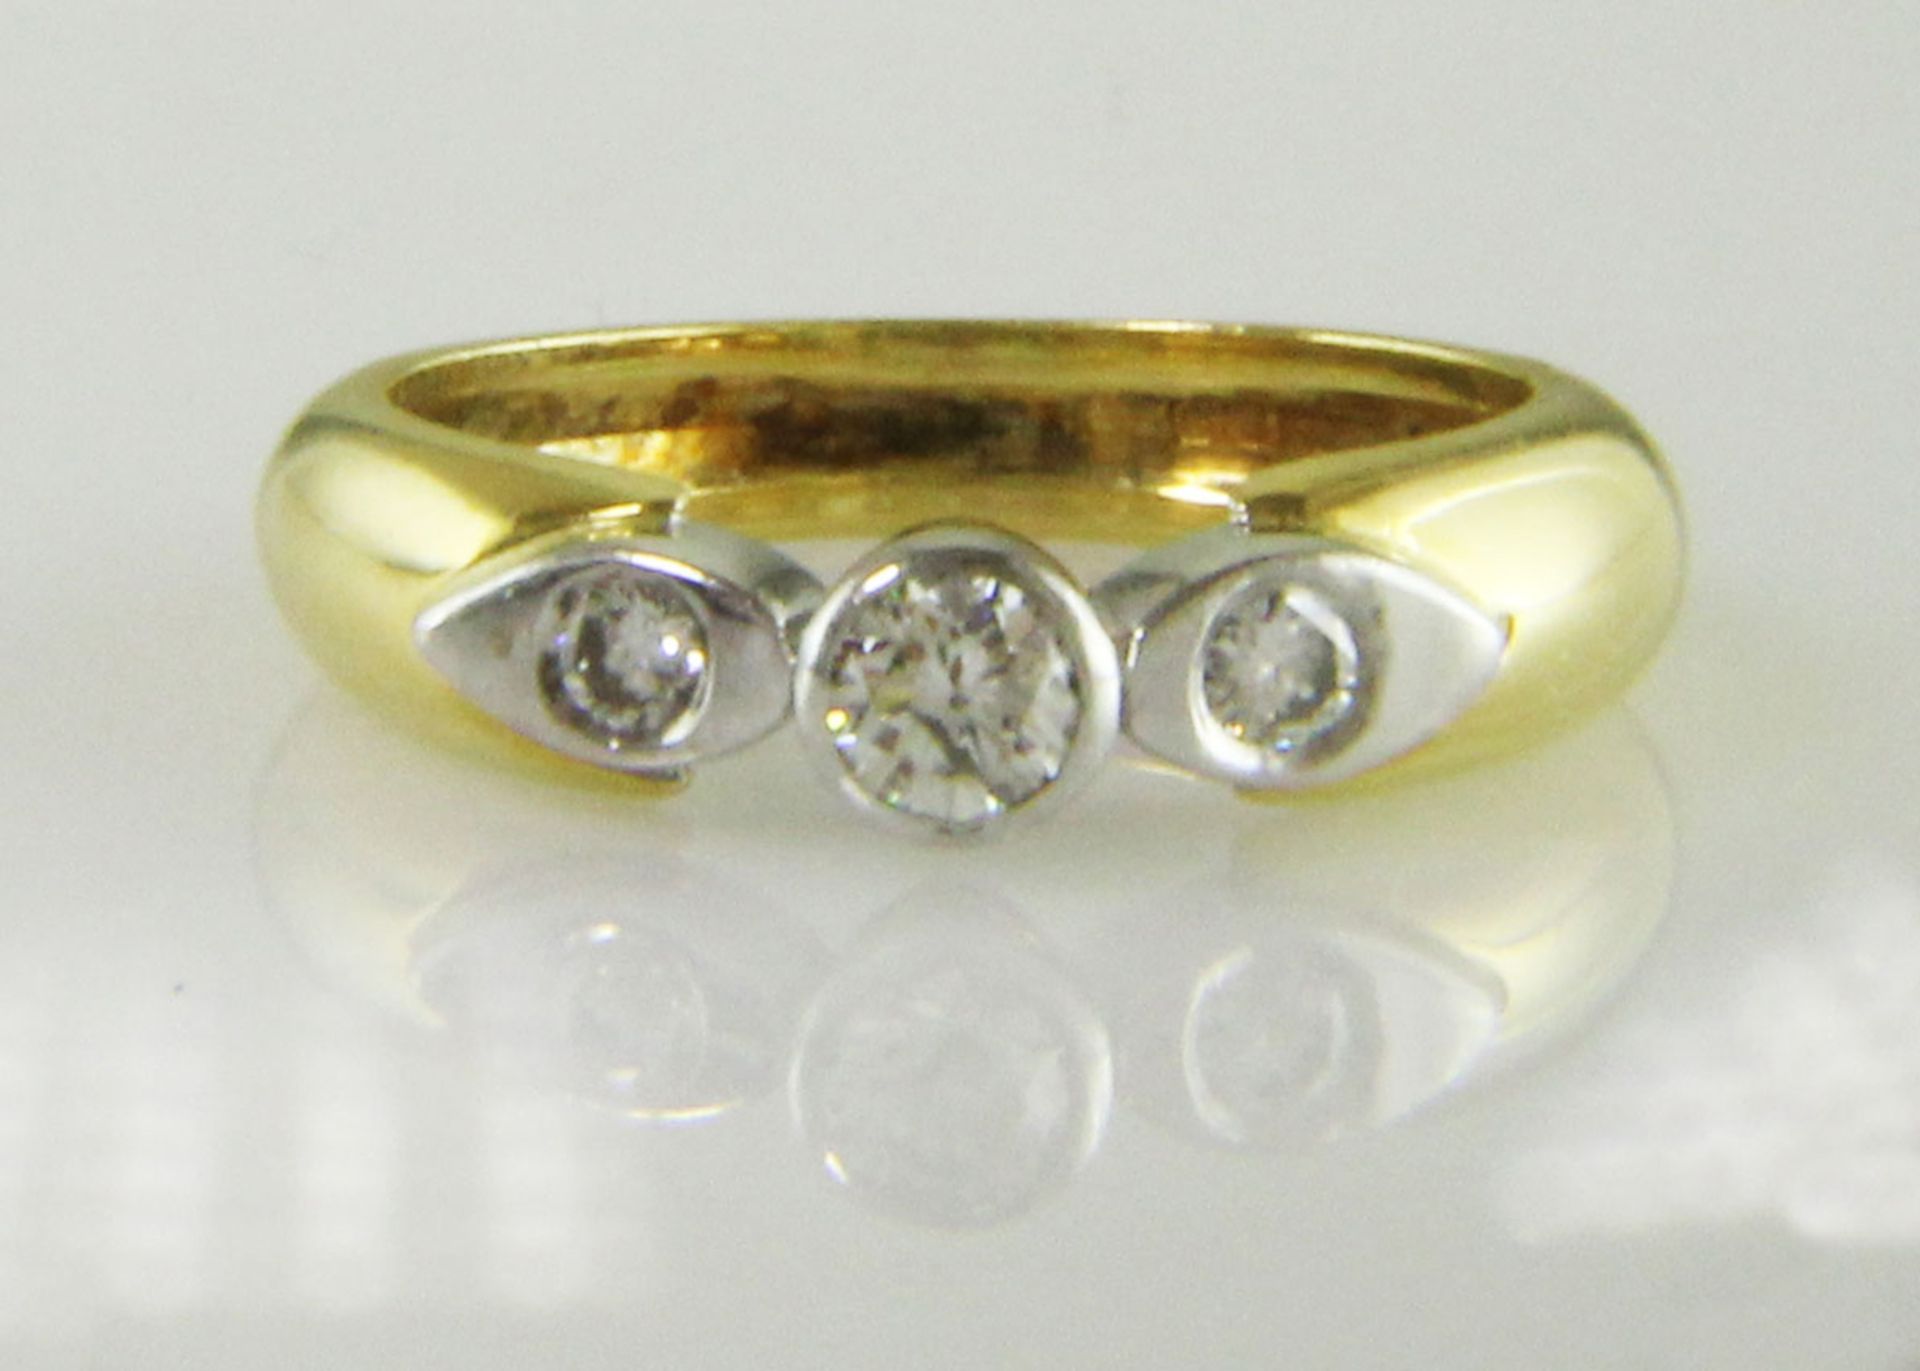 18ct Stone Set Shoulder Diamond Ring 0.41 Carats - Valued By GIE £6,840.00 - A striking rub set - Image 6 of 8